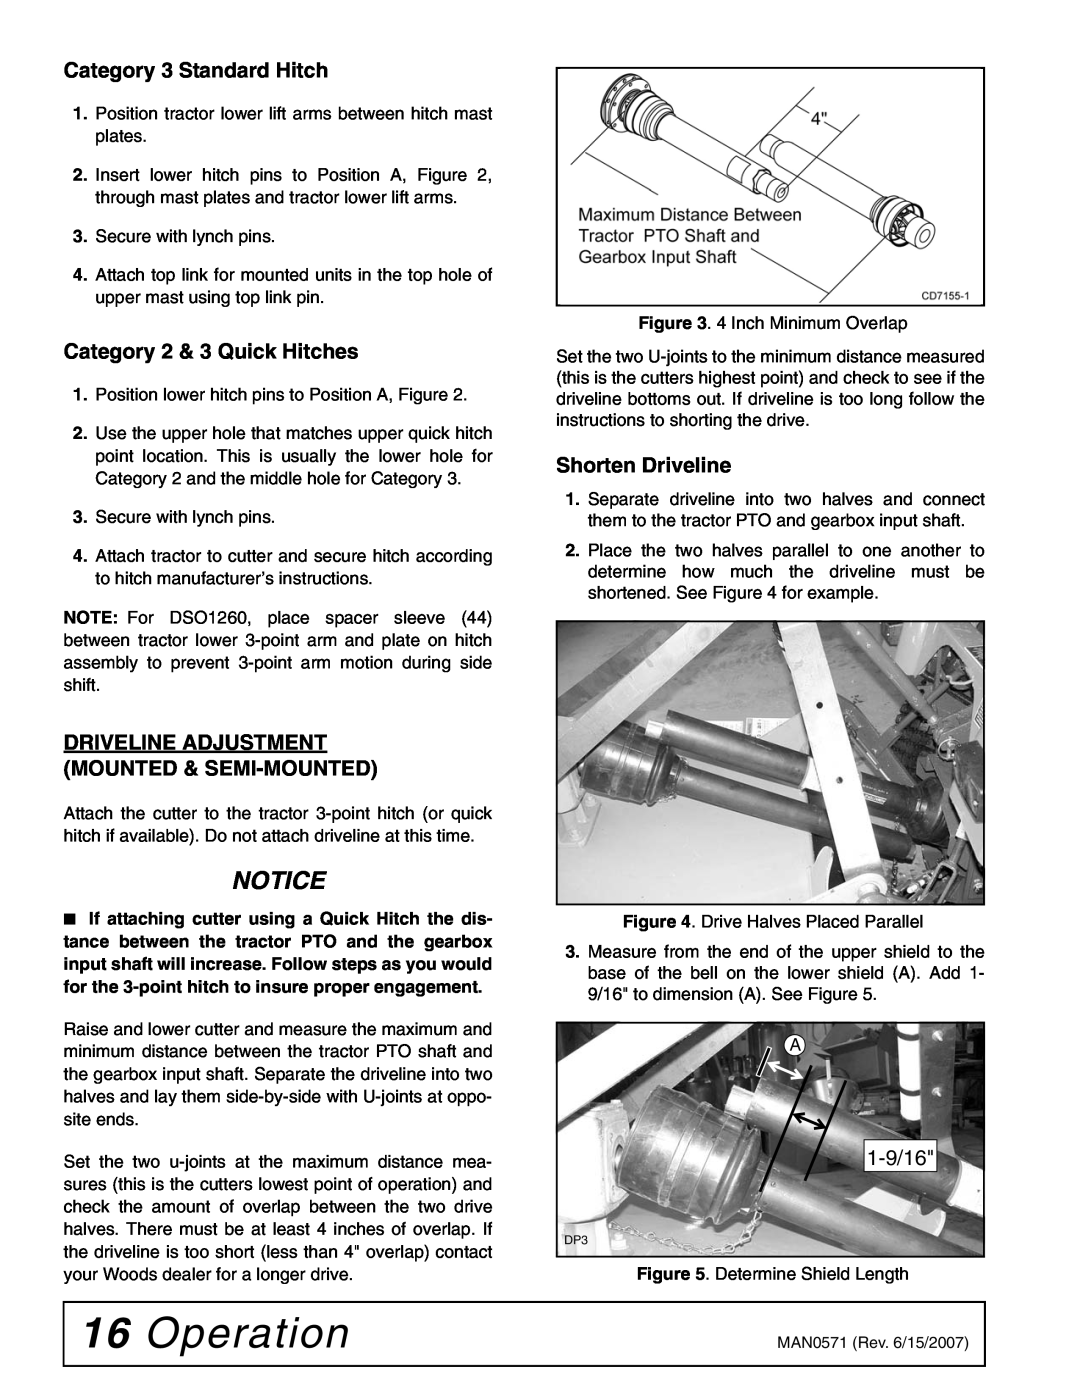 Woods Equipment DS1440 manual Operation, Category 3 Standard Hitch, Category 2 & 3 Quick Hitches, Shorten Driveline, 1-9/16 